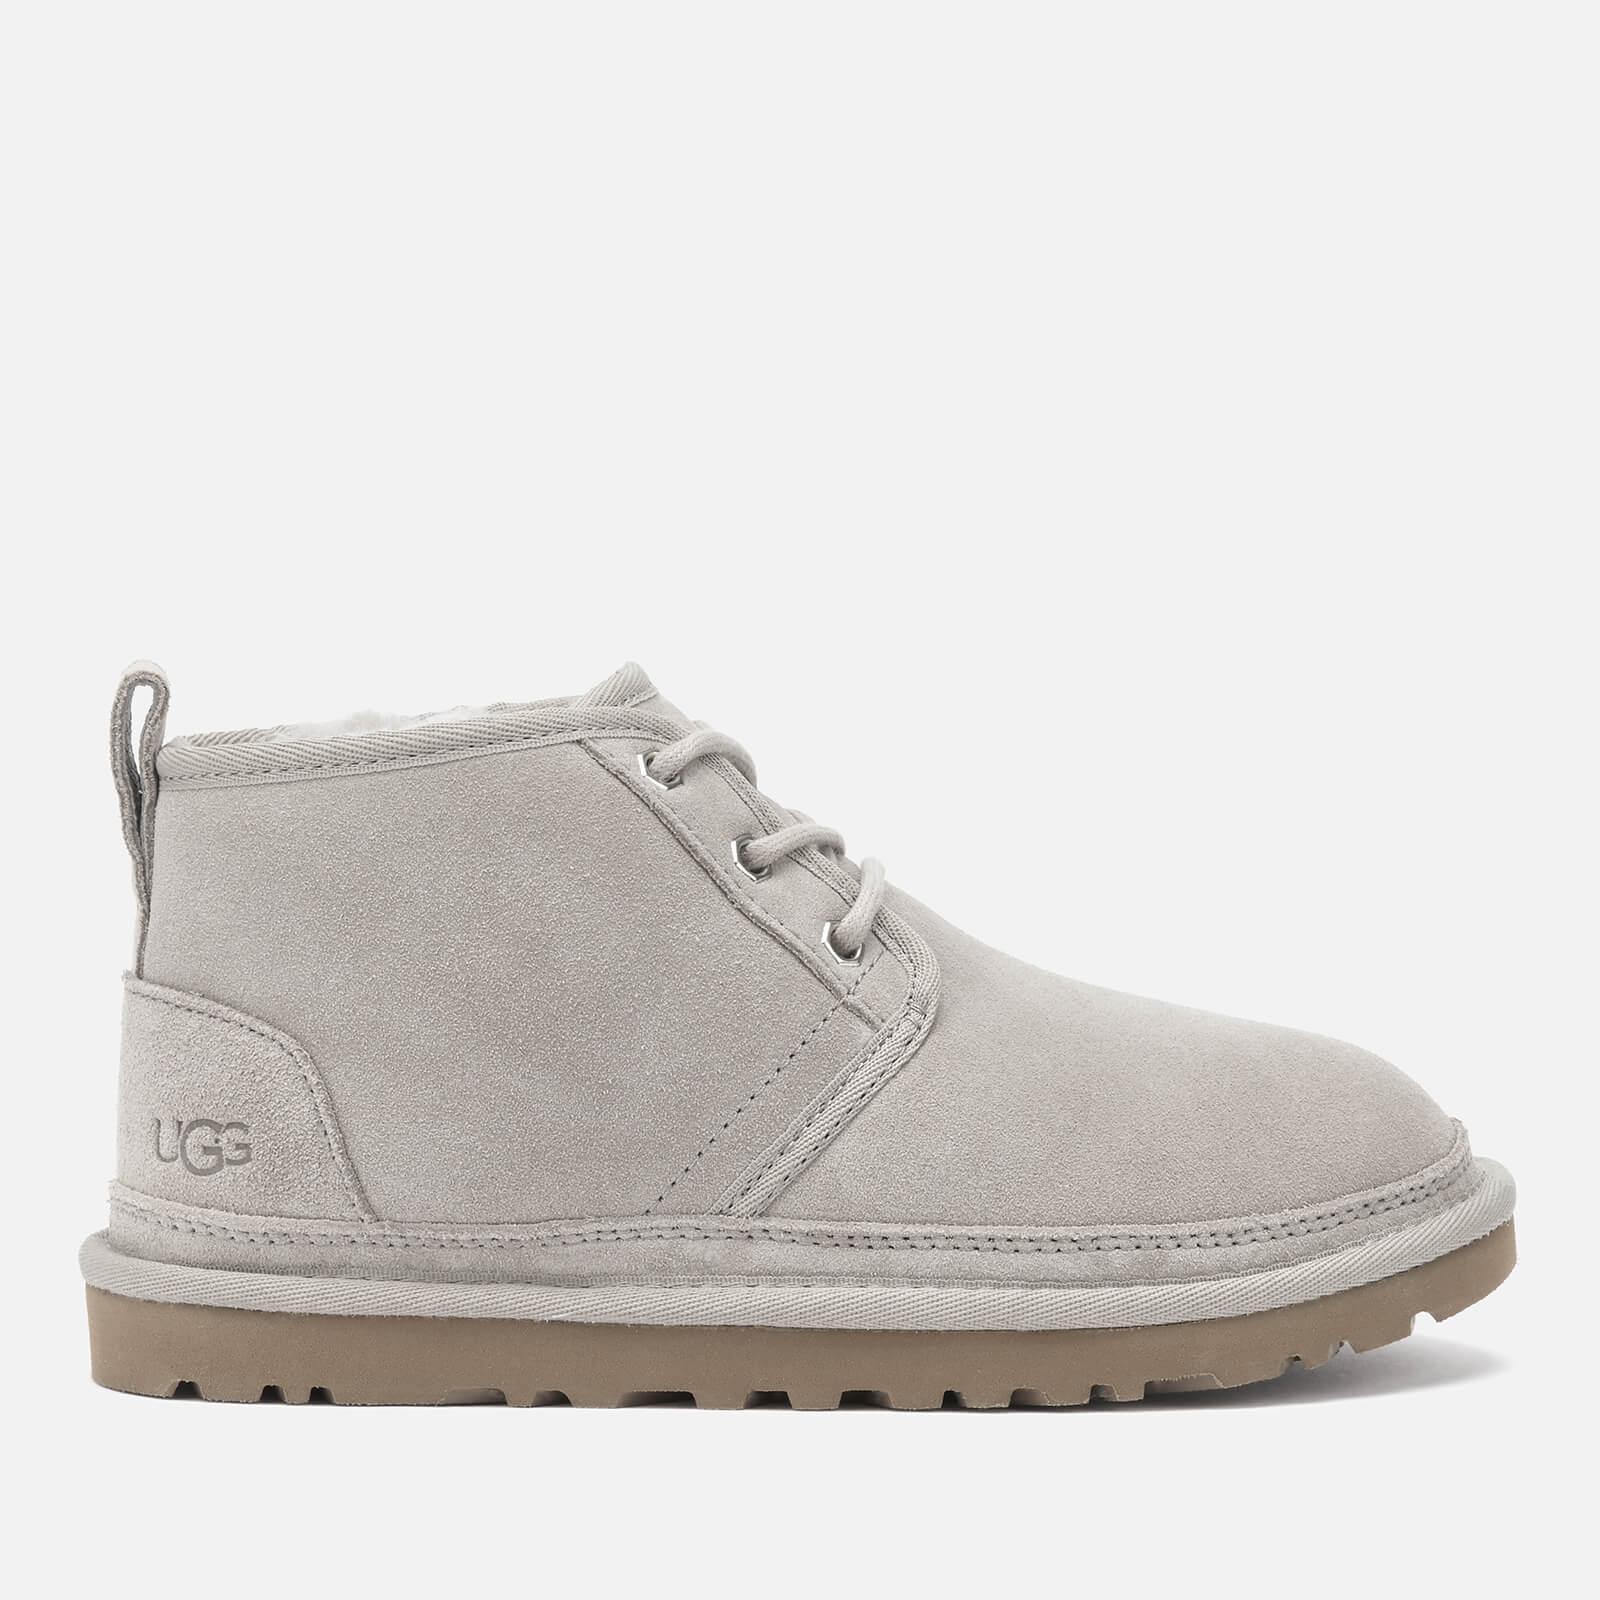 UGG Neumel Boots in Gray | Lyst